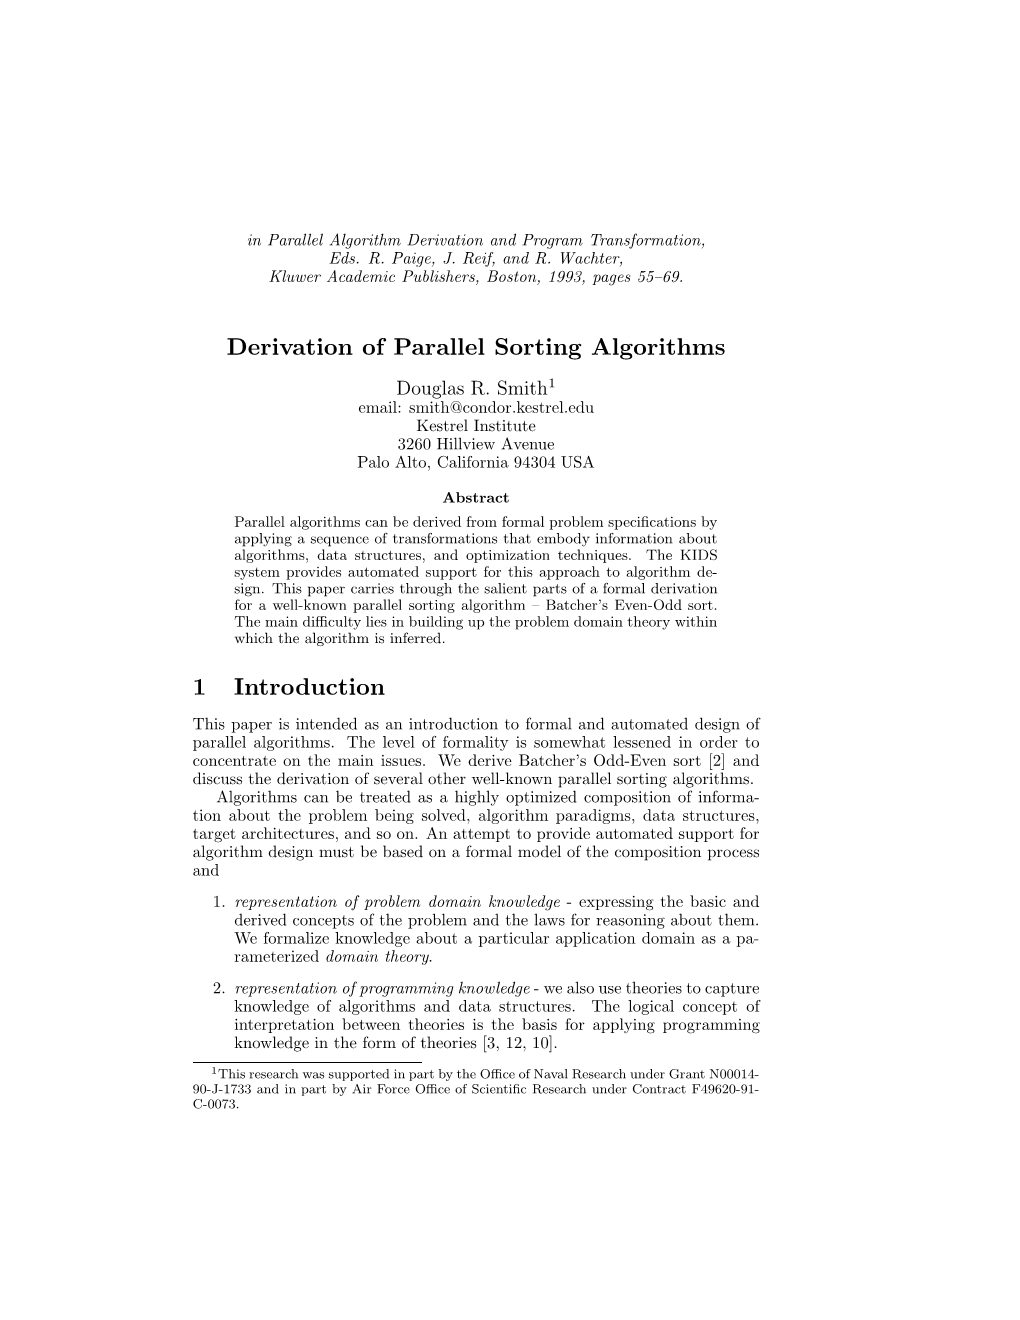 Derivation of Parallel Sorting Algorithms 1 Introduction